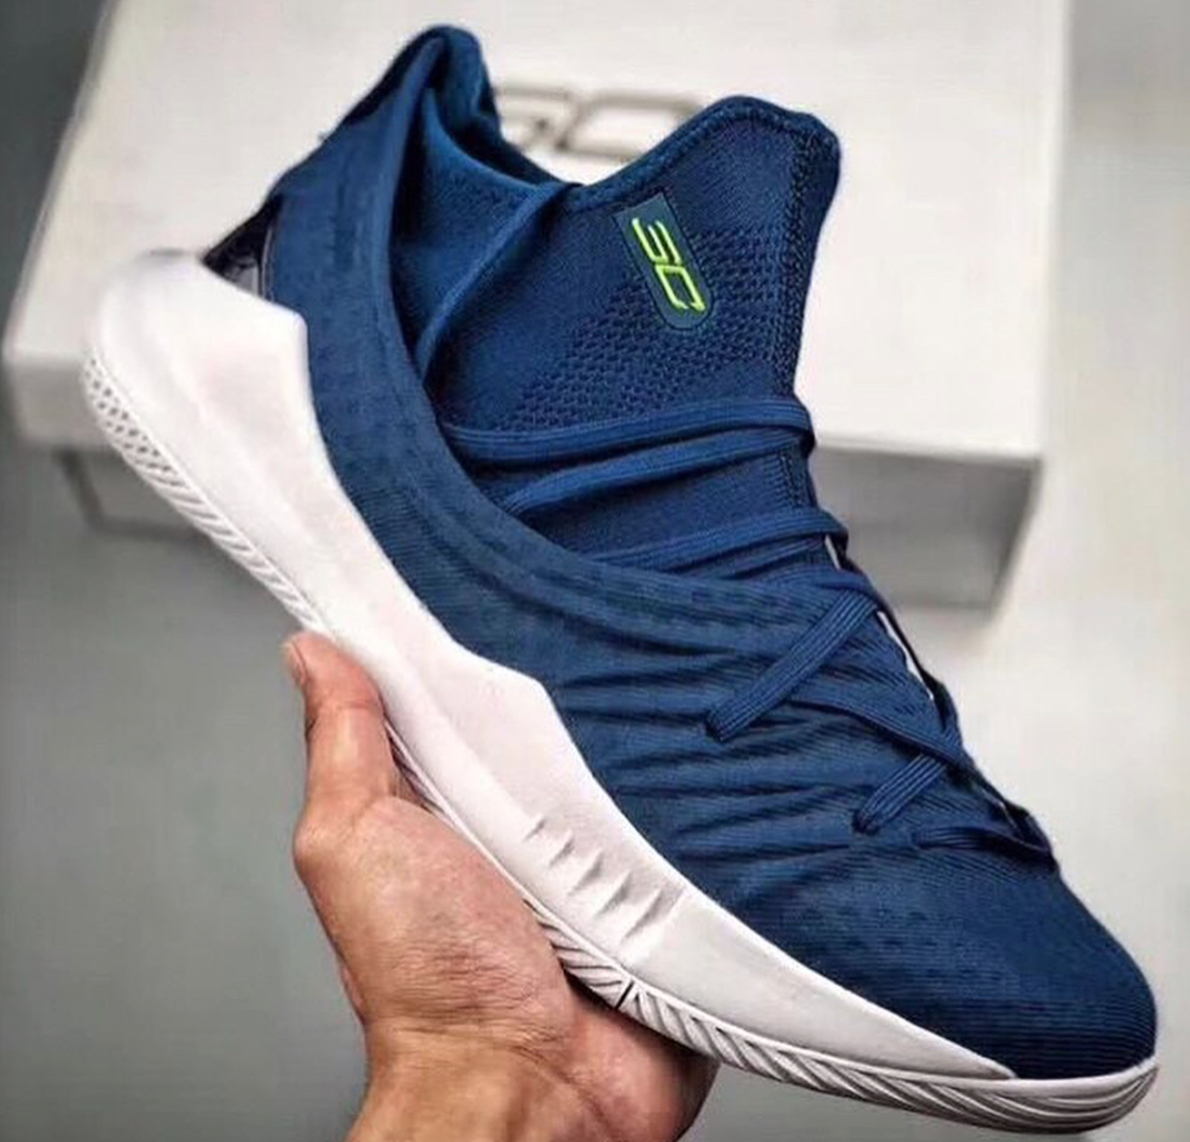 Under Armour Curry 5 Surfaces in Navy 